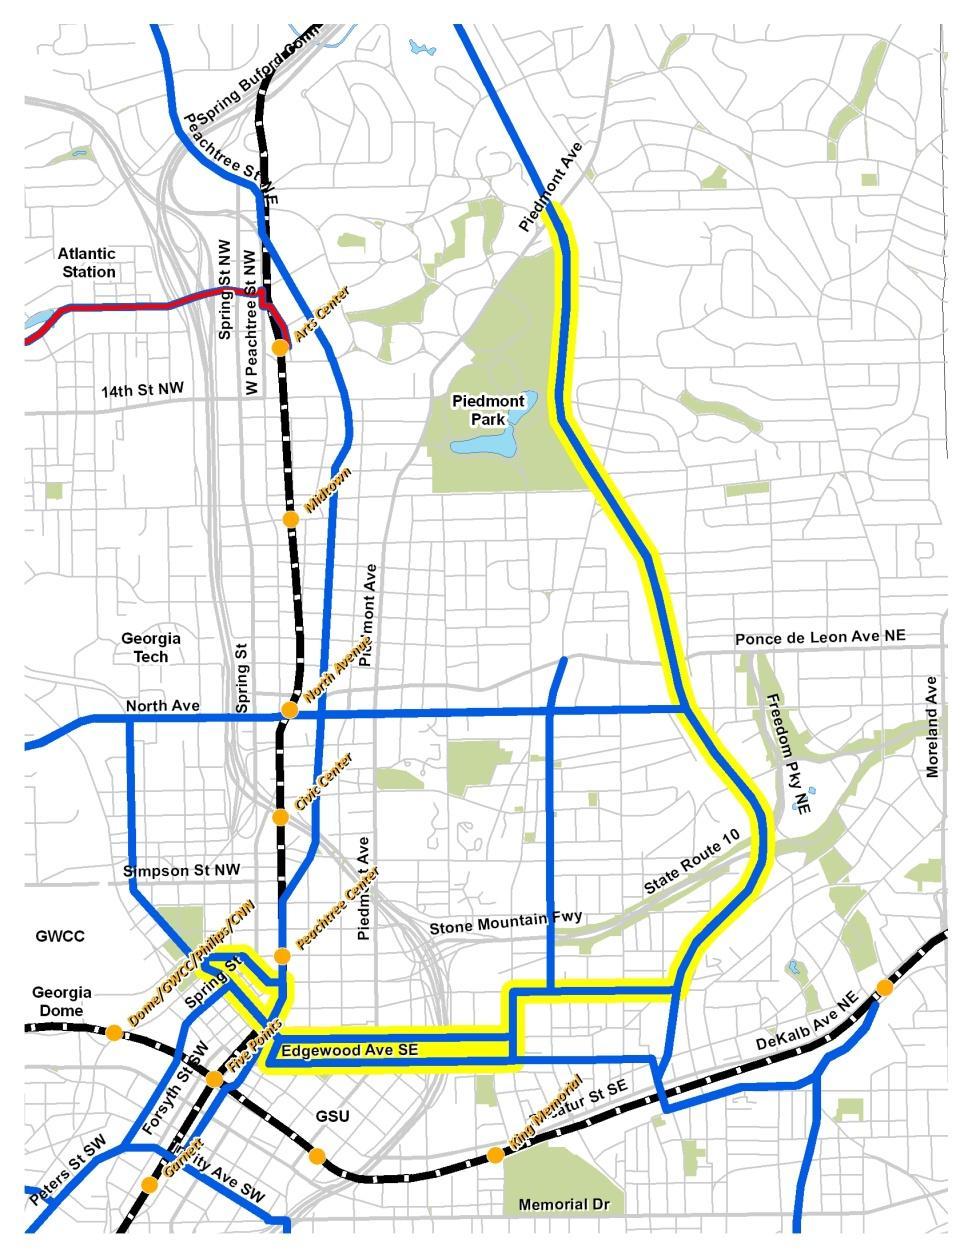 potential single seat ride route from Piedmont Park to Downtown No transfers